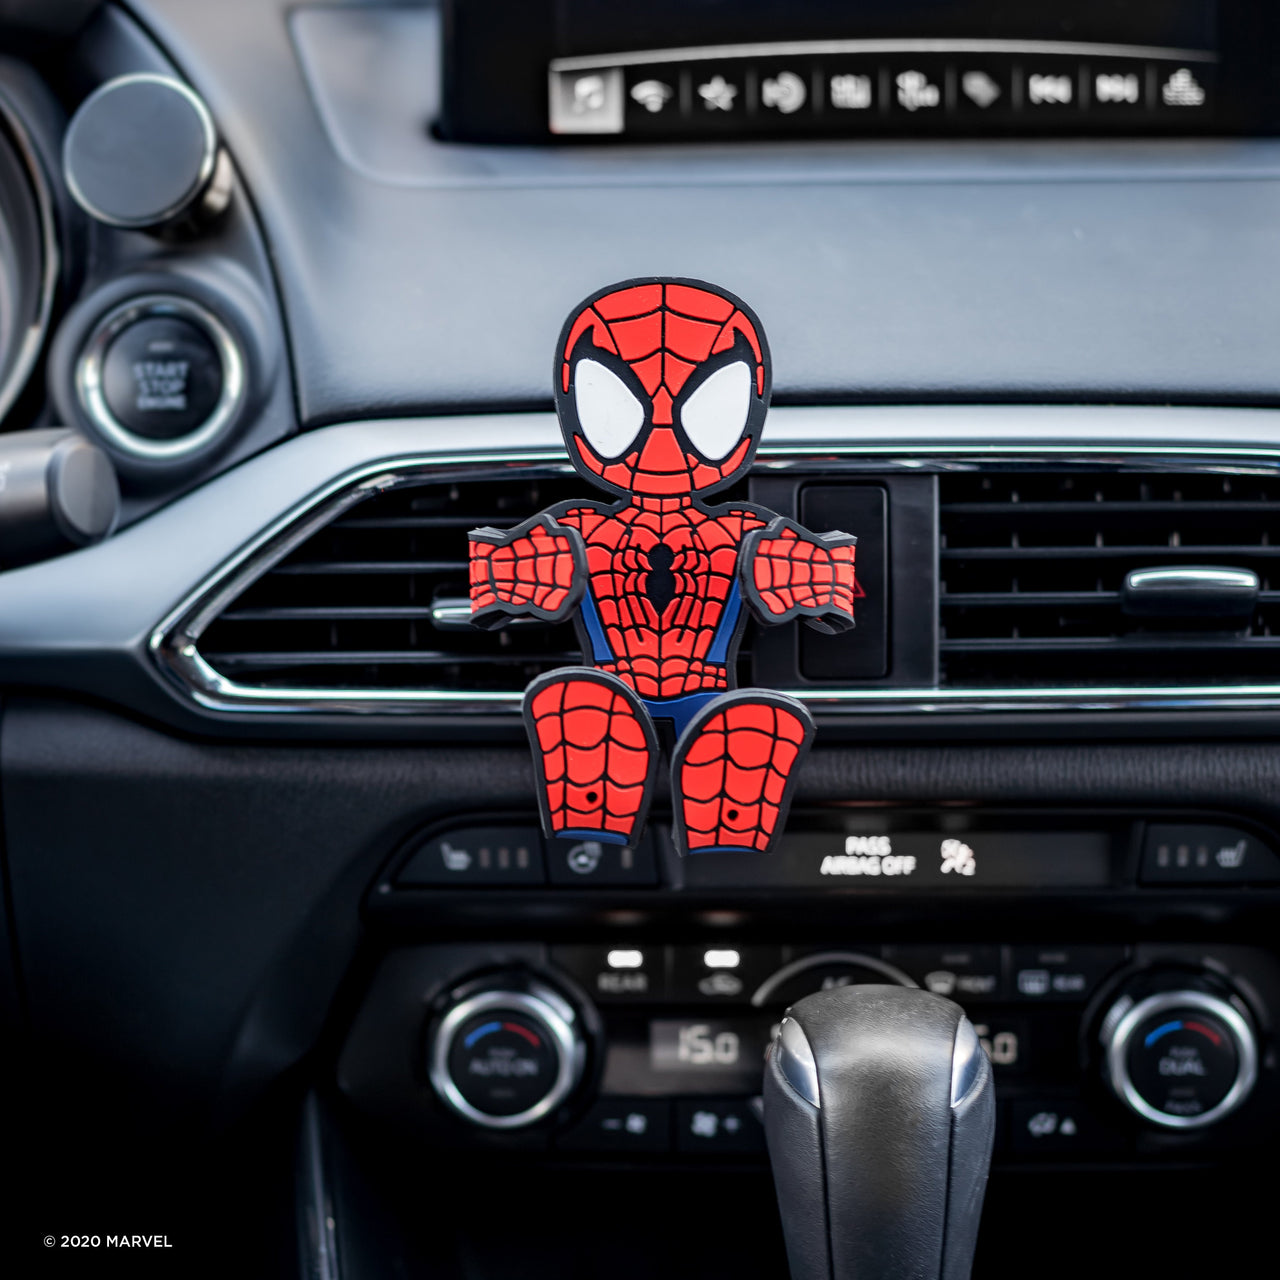 Image of Marvel Comics Spider-Man Hug Buddy with arms and legs in the folded closed position attached to a car air vent, ready to hold a cell-phone or other smart device